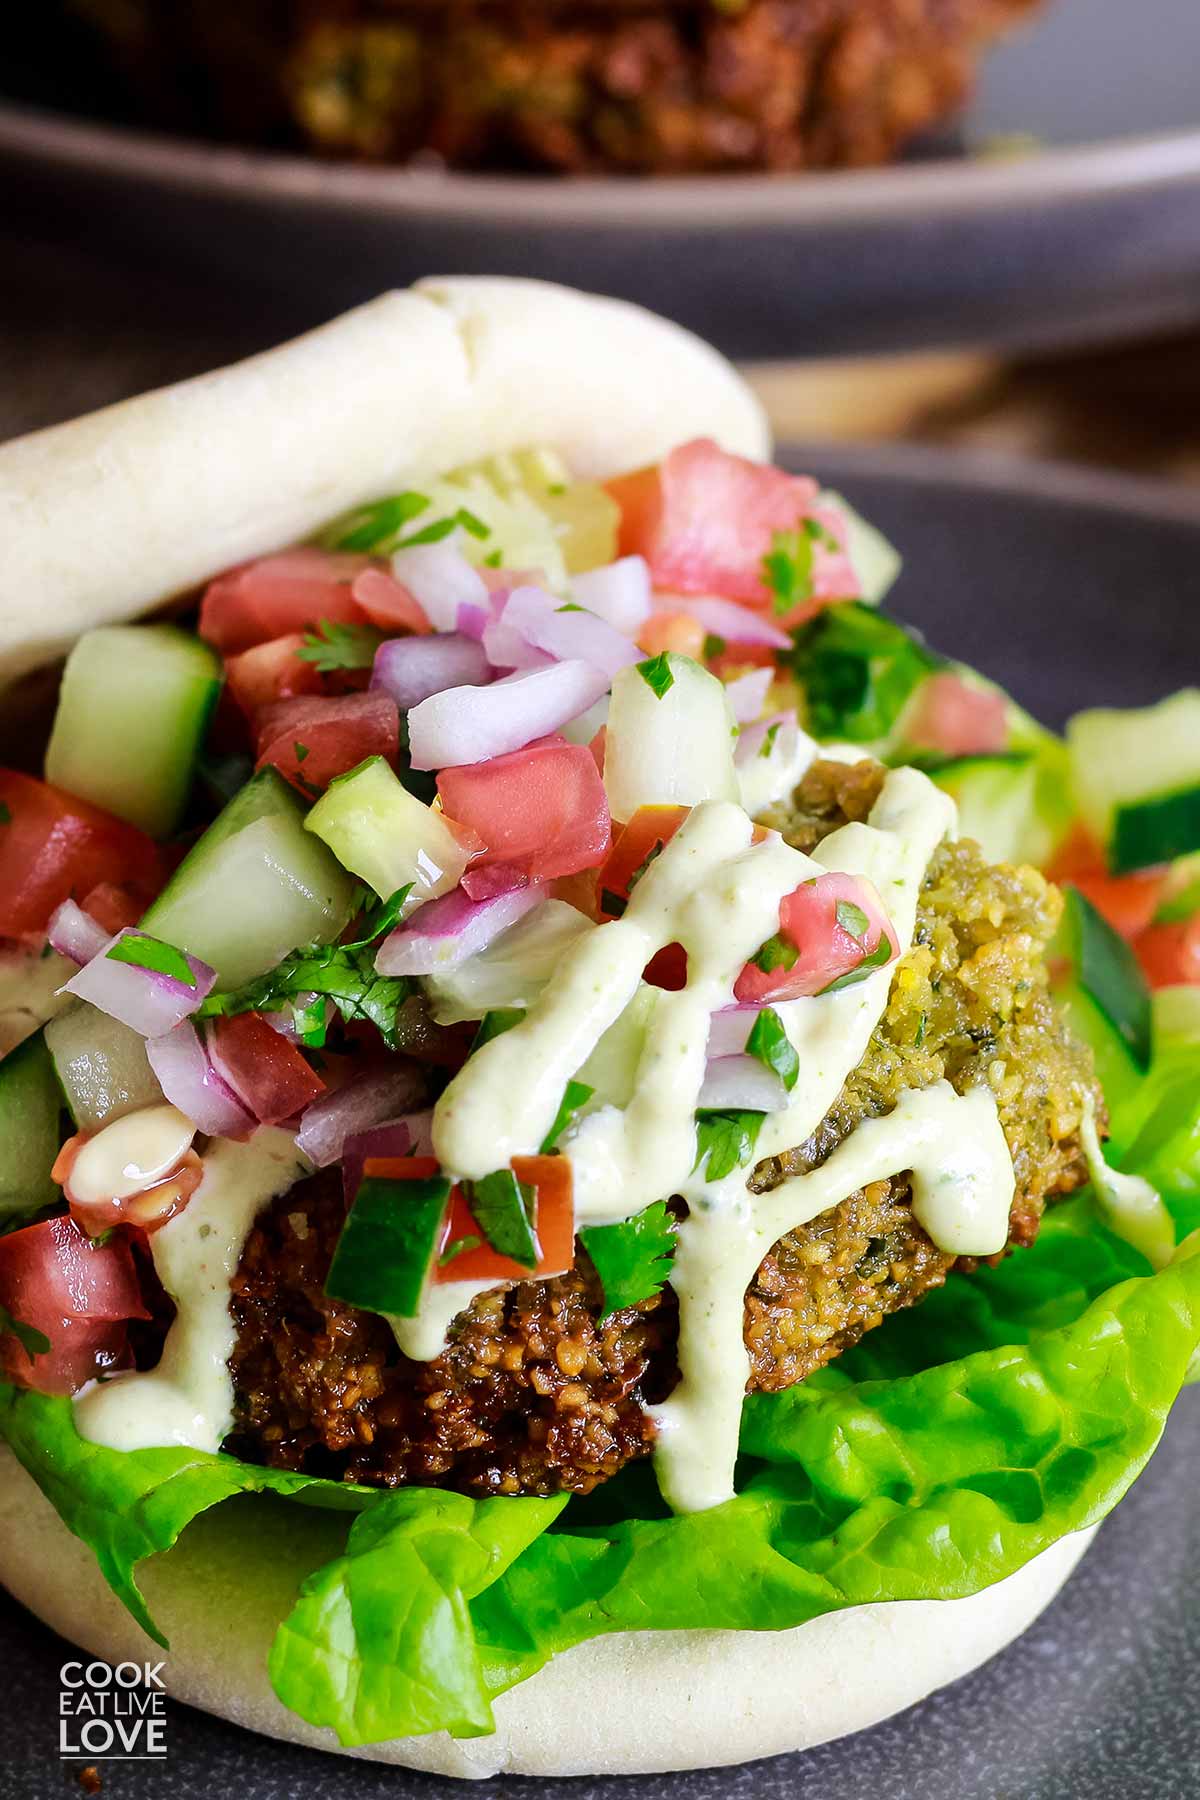 A falafel burger with lemon tahini sauce and cucumber topping on a plate.